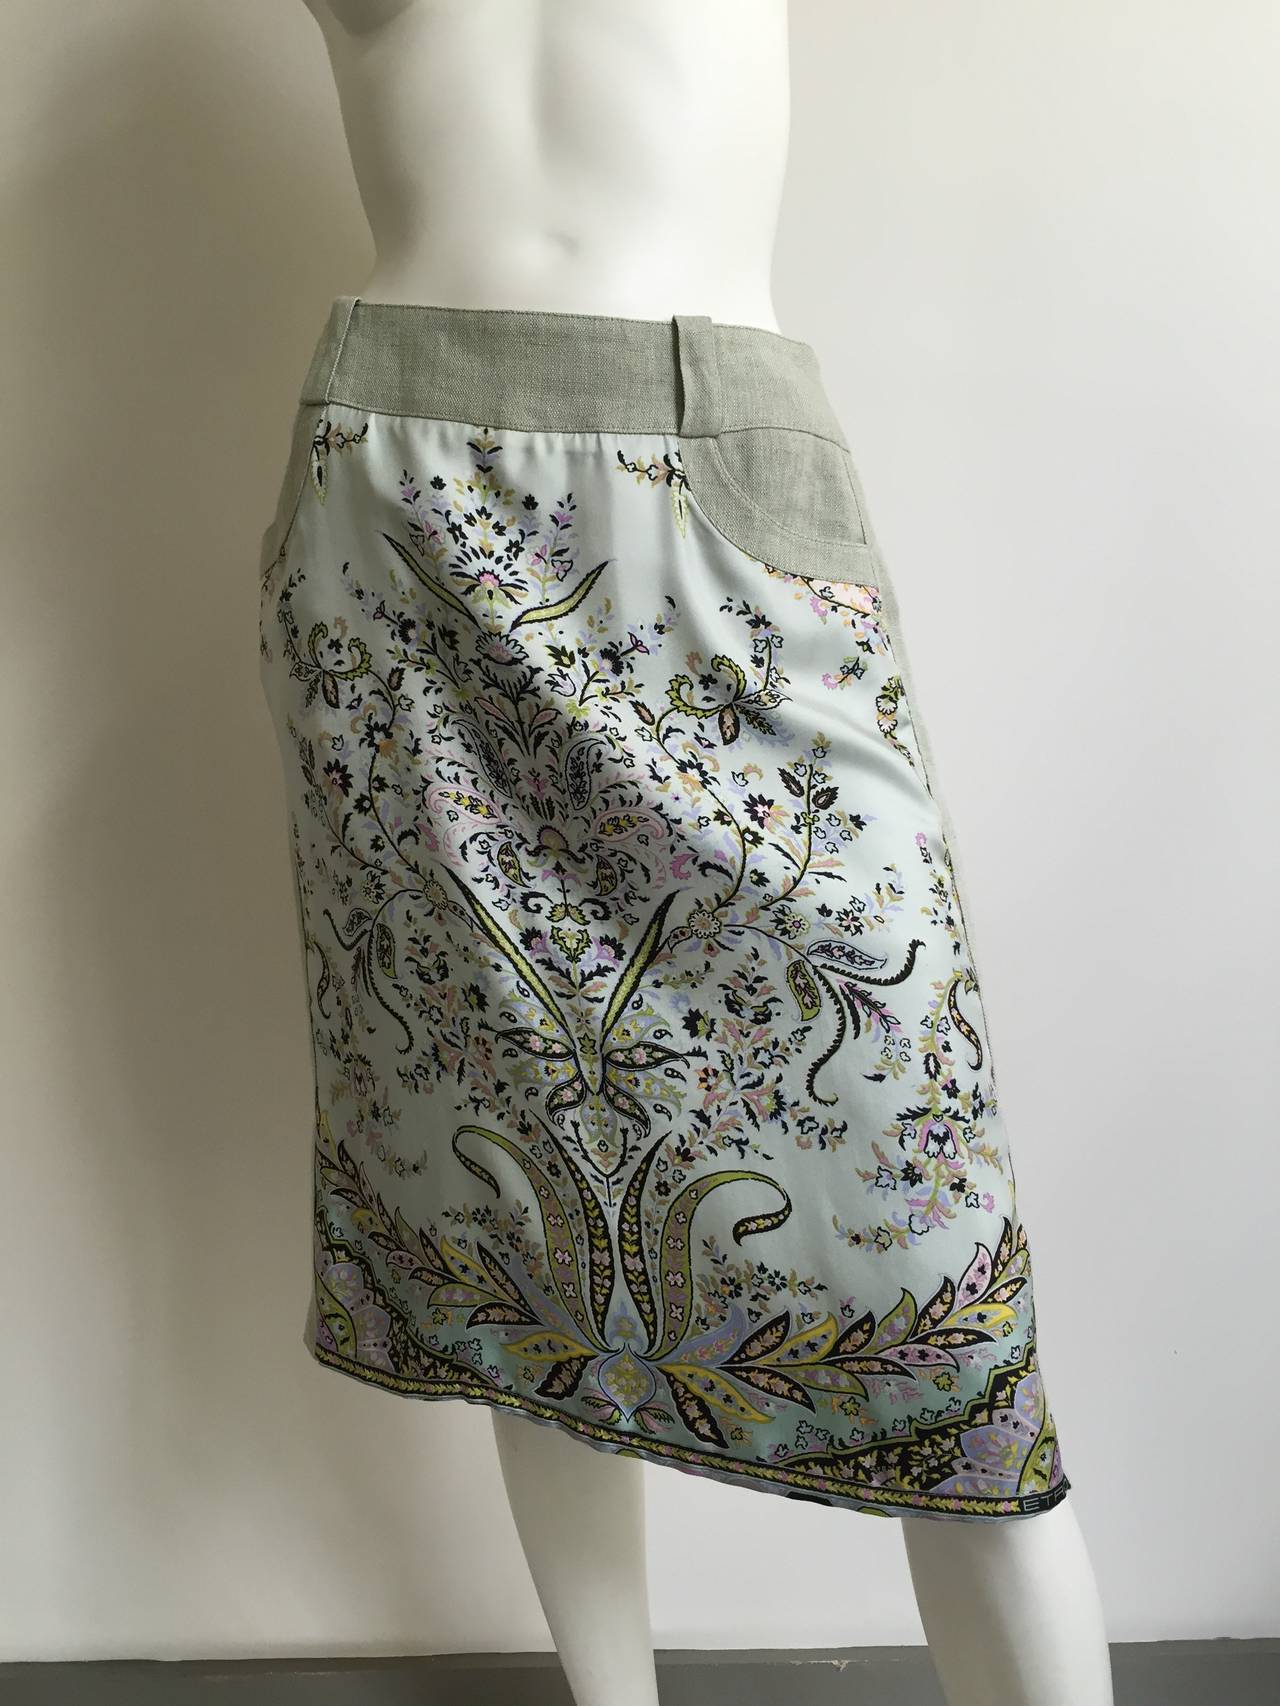 Etro silk and linen trim skirt is an Italian size 46 and fits an USA size 6.  Ladies please grab your tape measure so you can measure your waistline and hips to make certain this 29